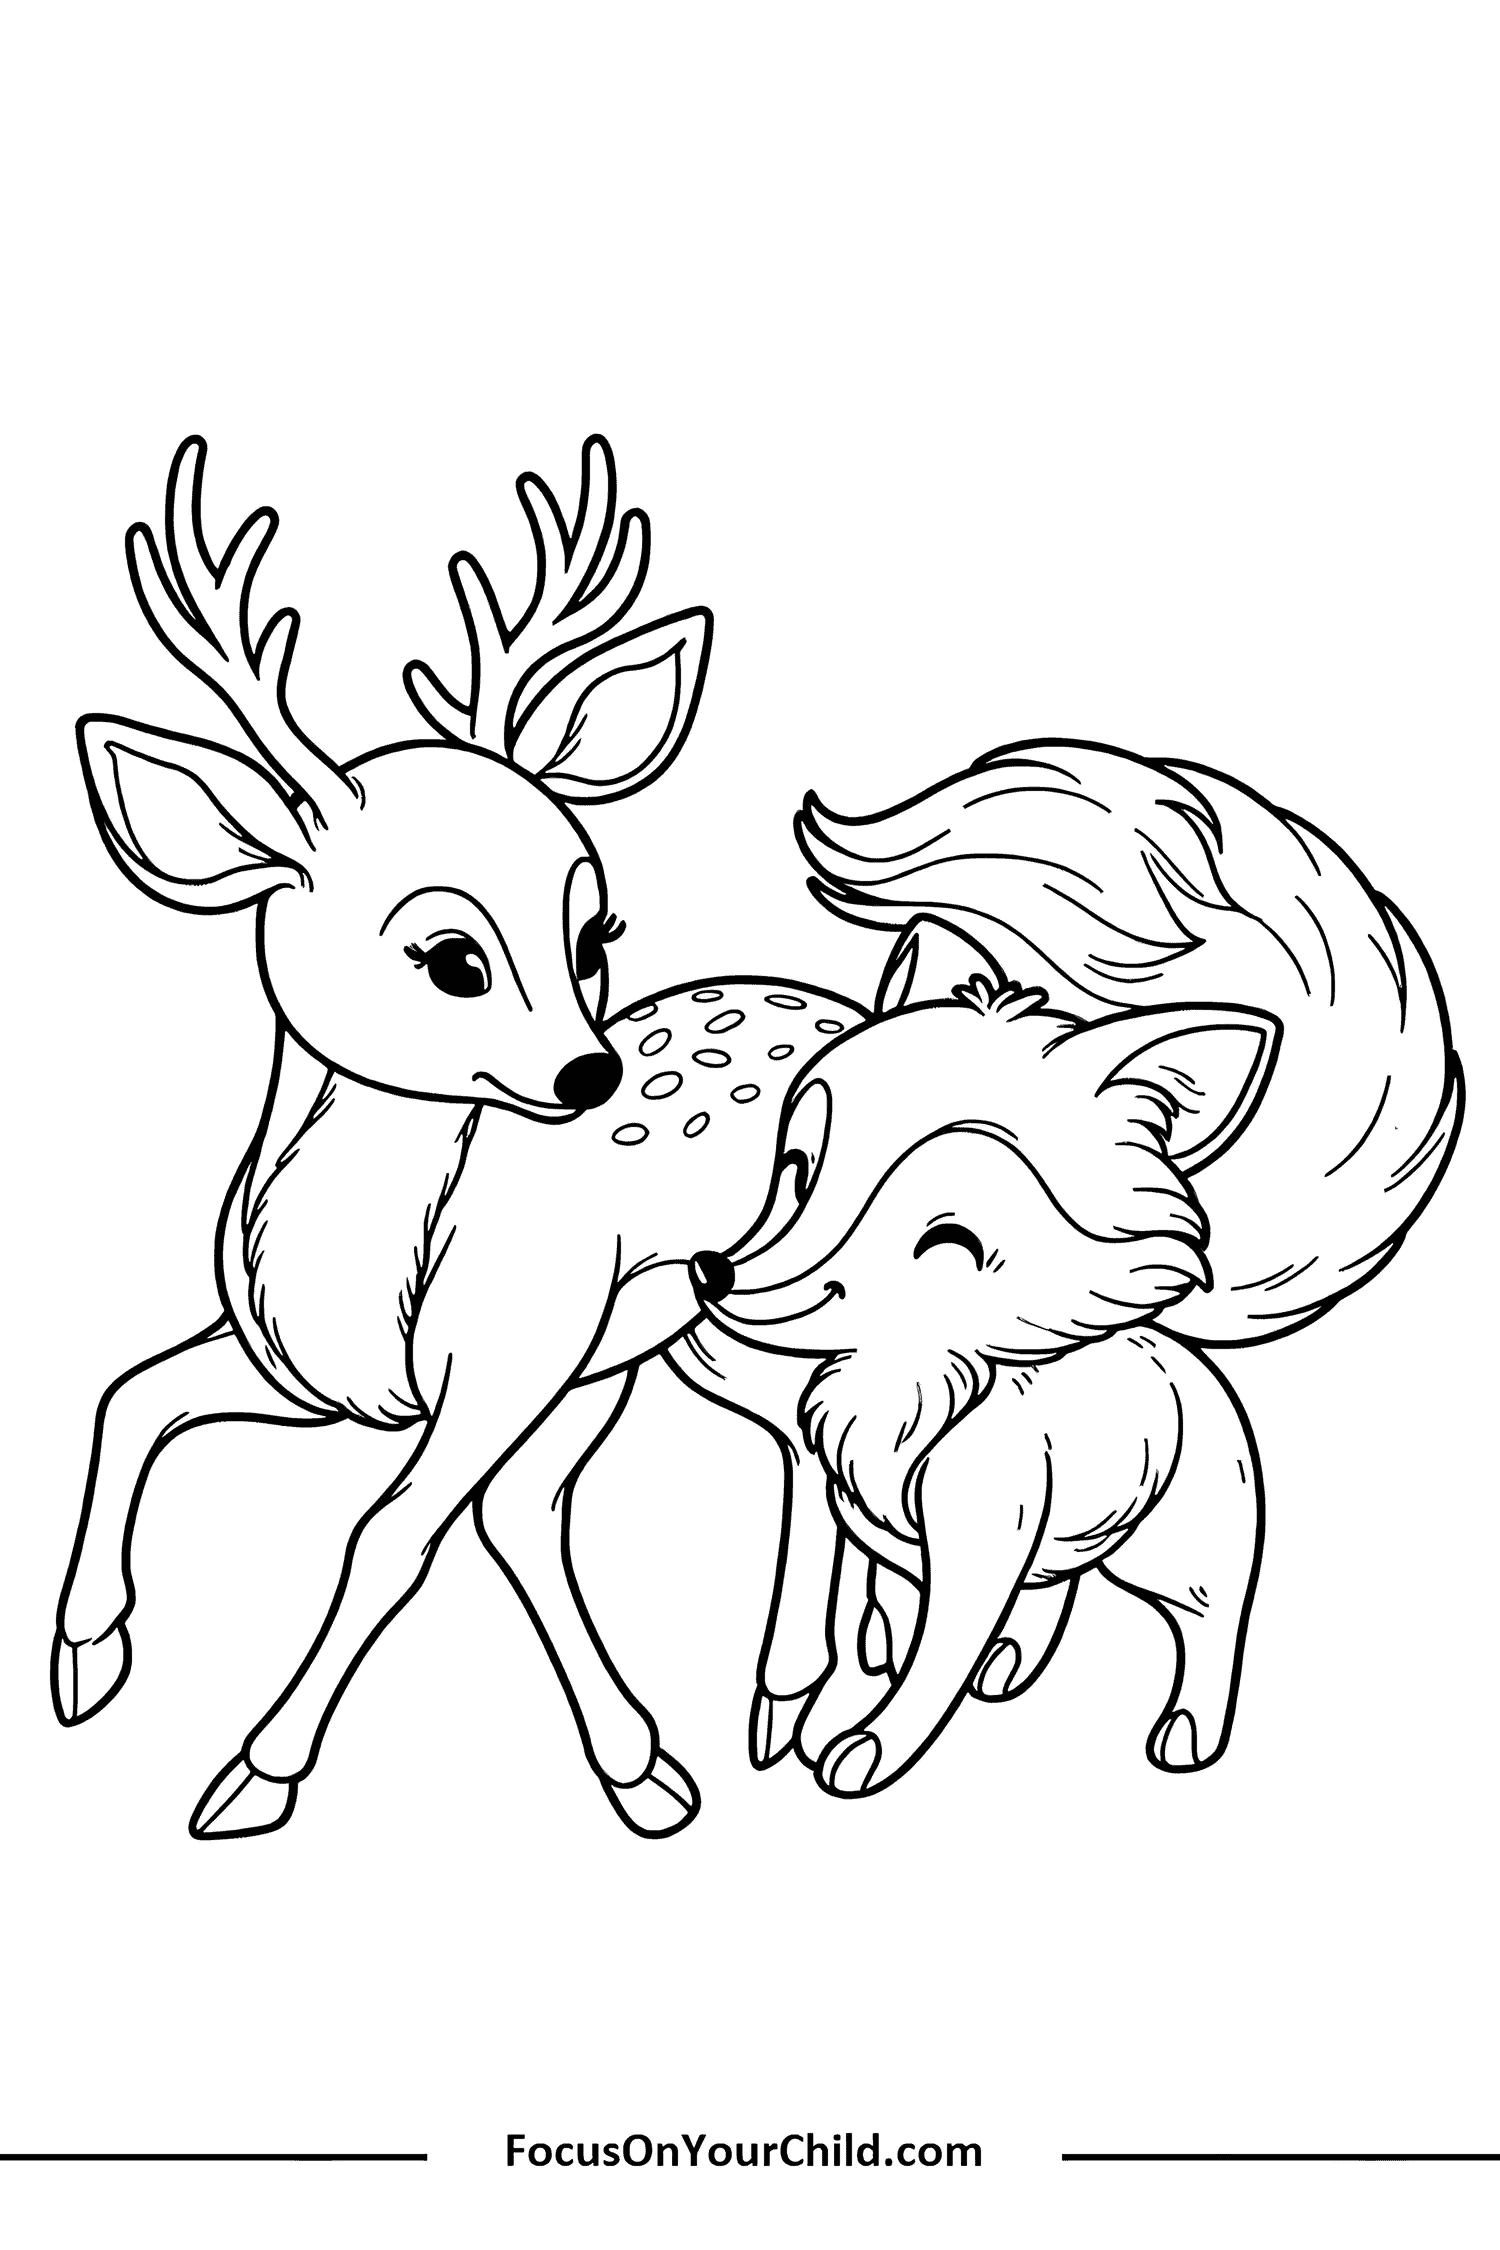 Friendly deer and fox in a playful interaction.